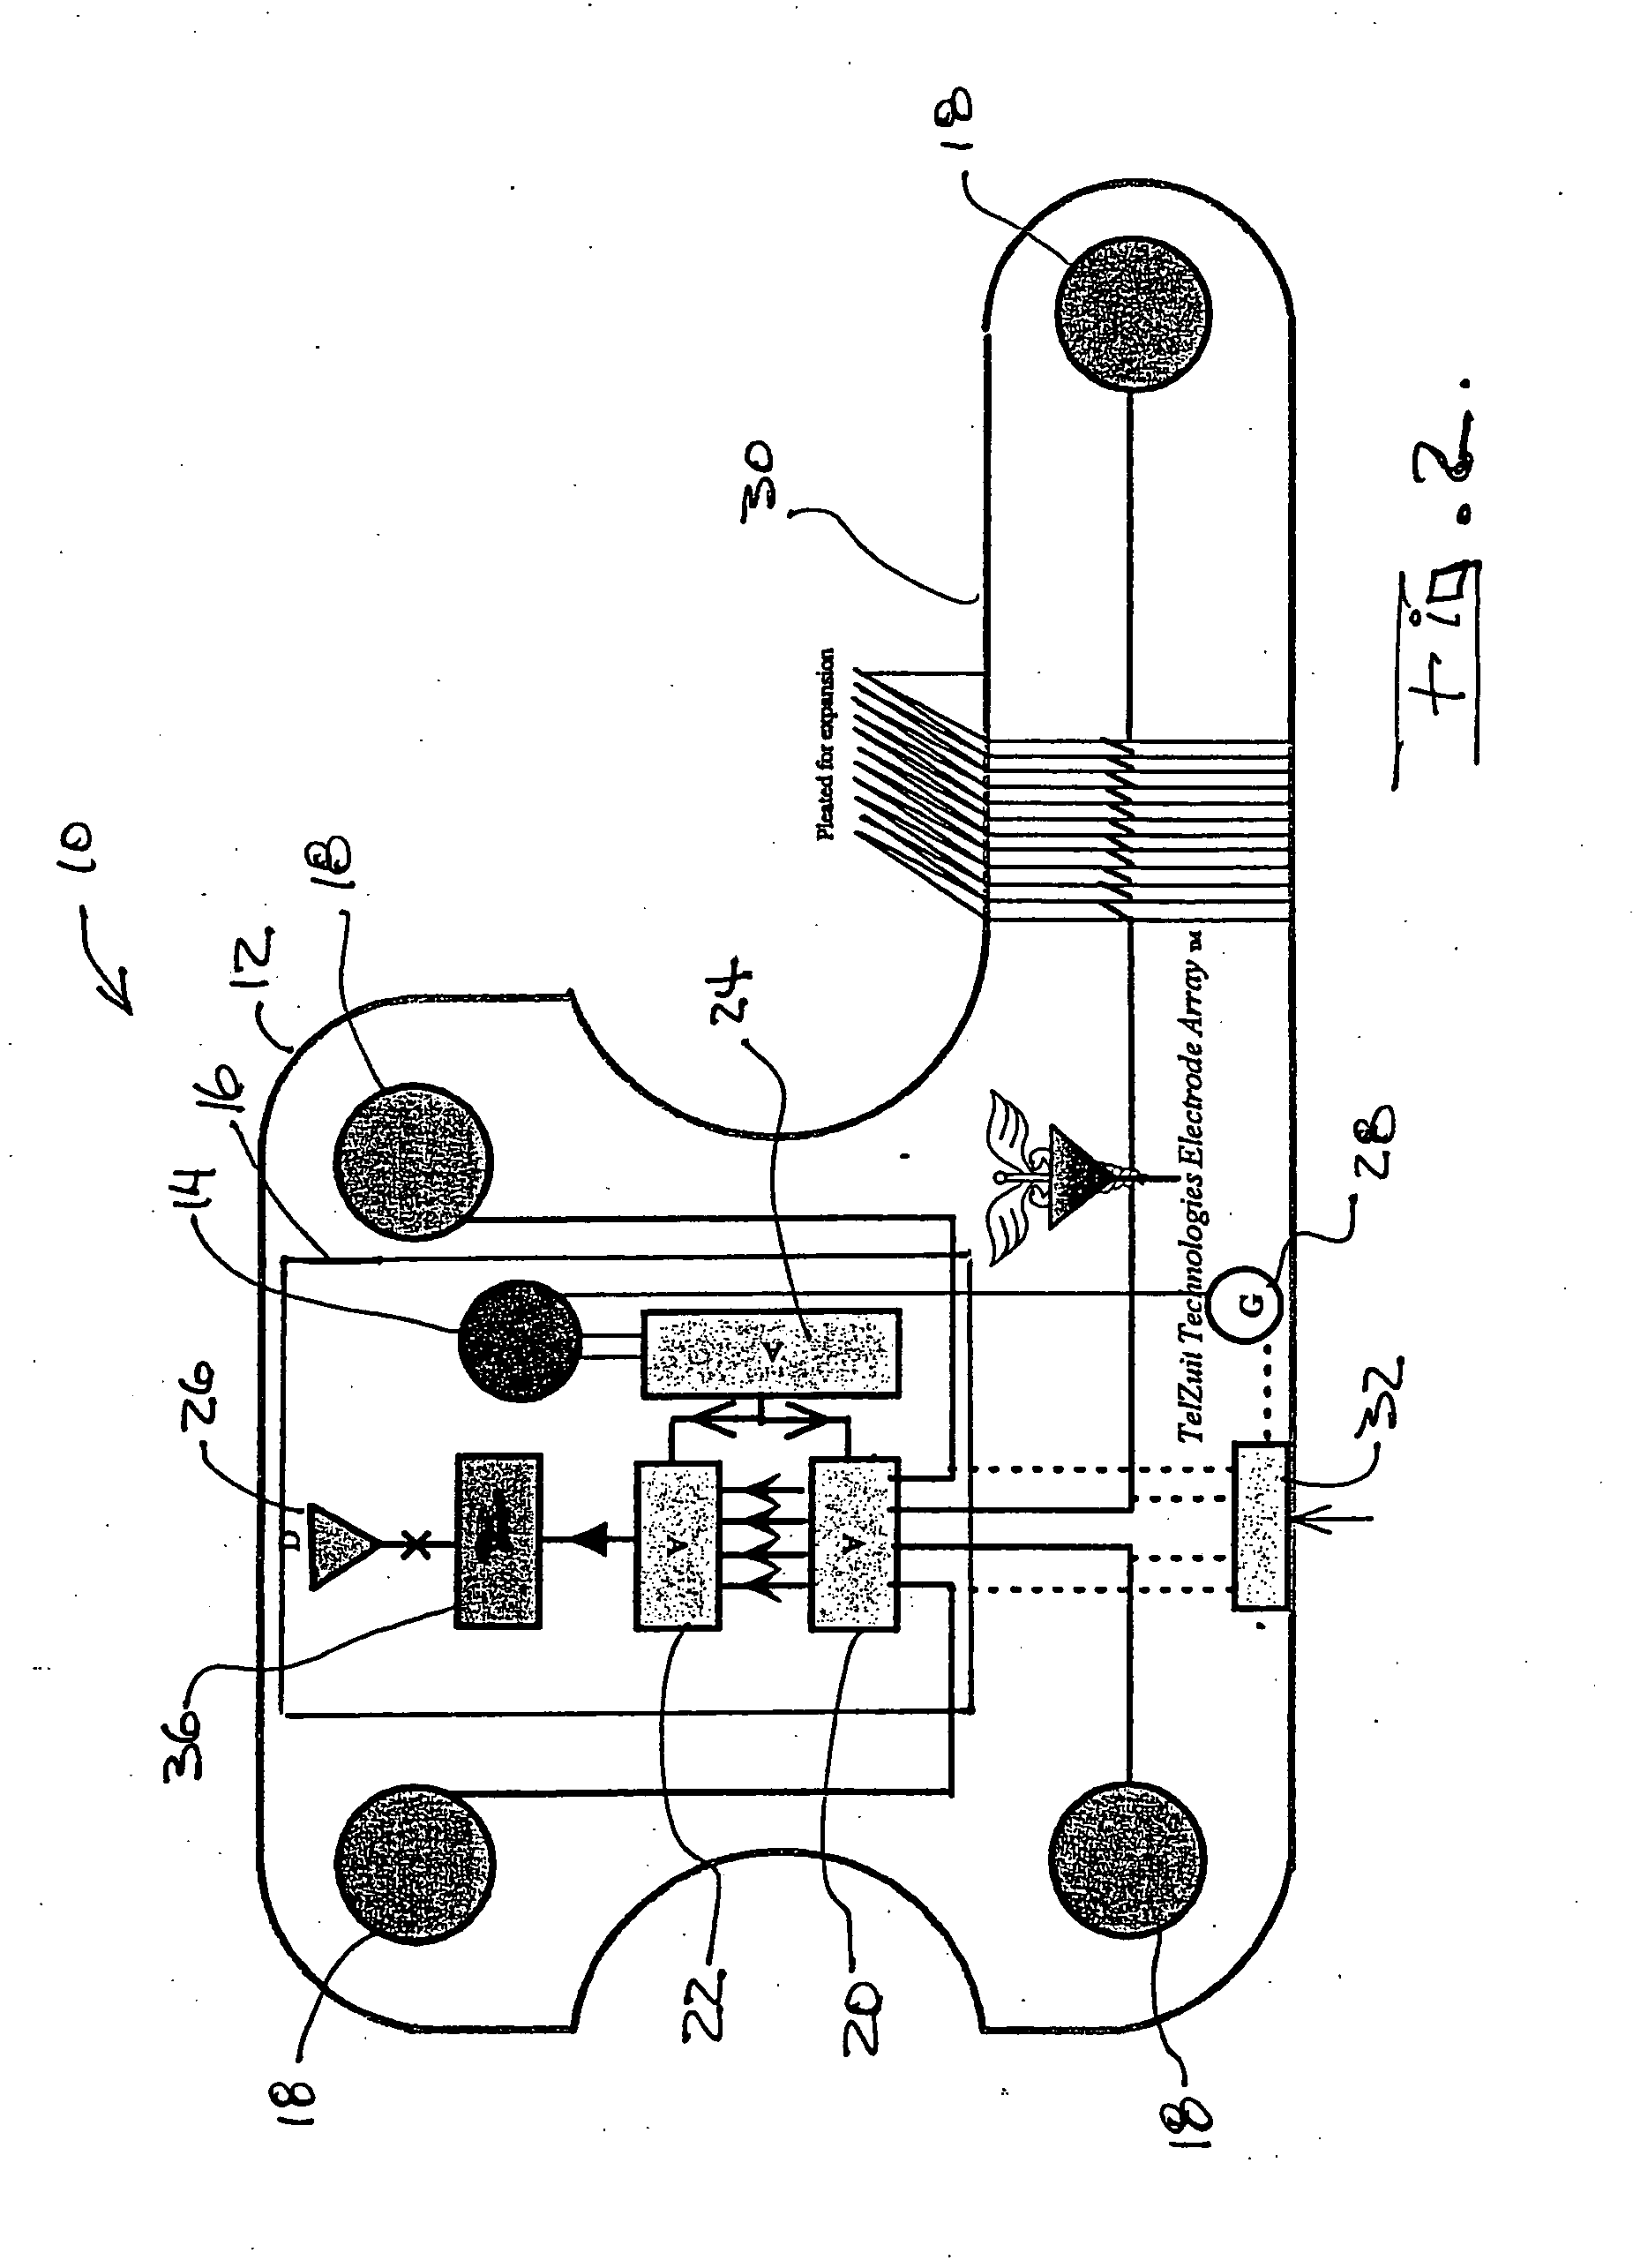 Wireless medical monitoring apparatus and system